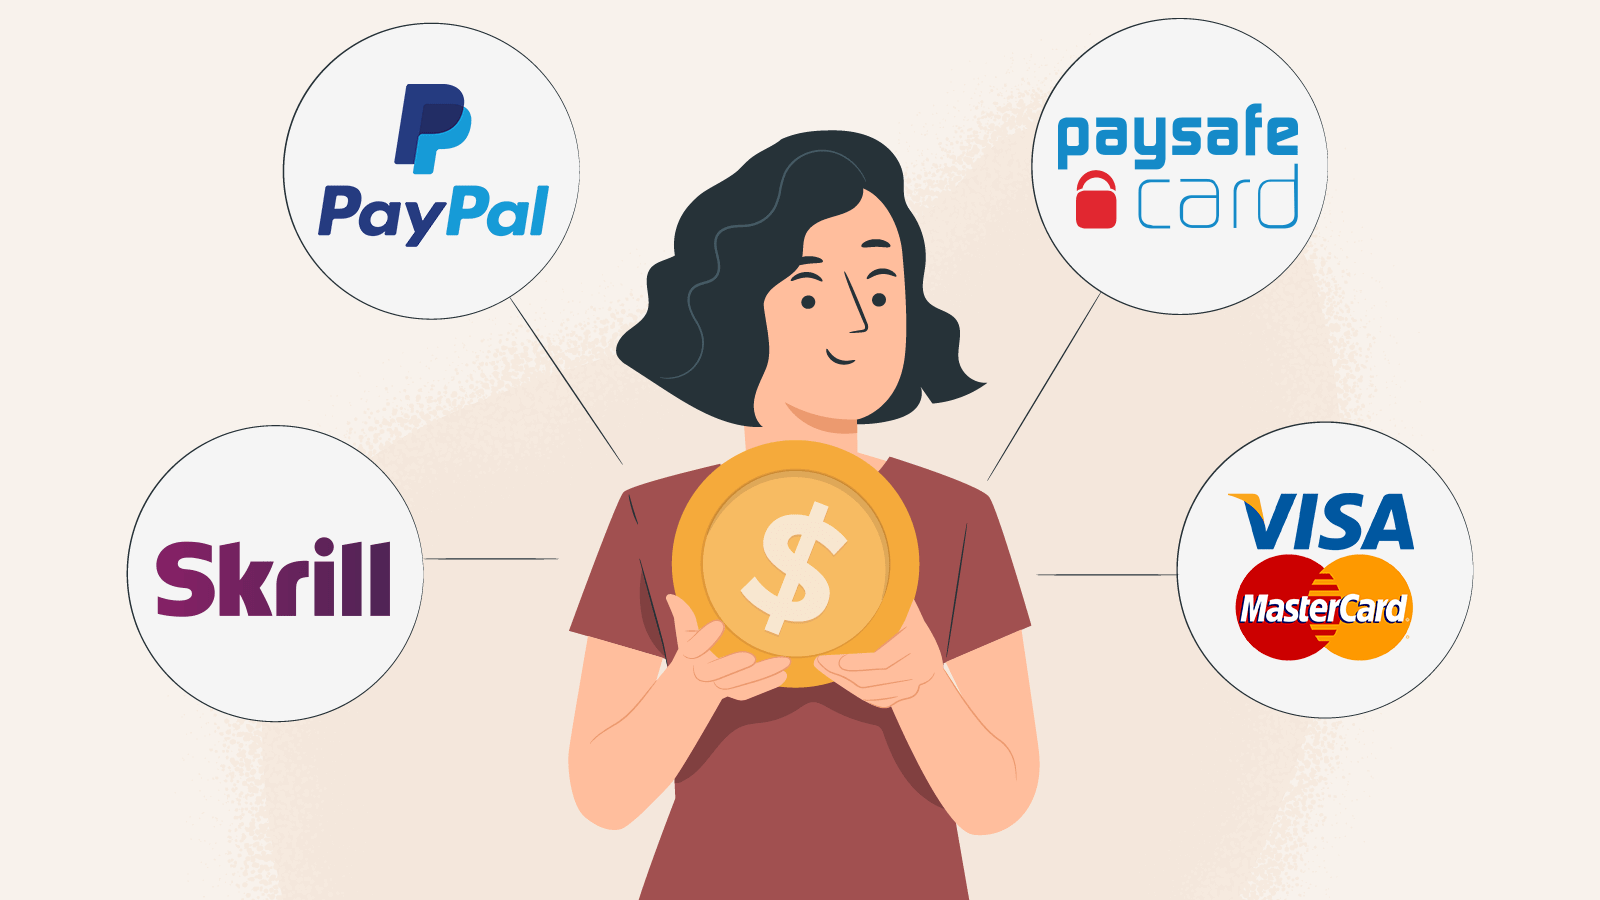 Know what payment methods you can use